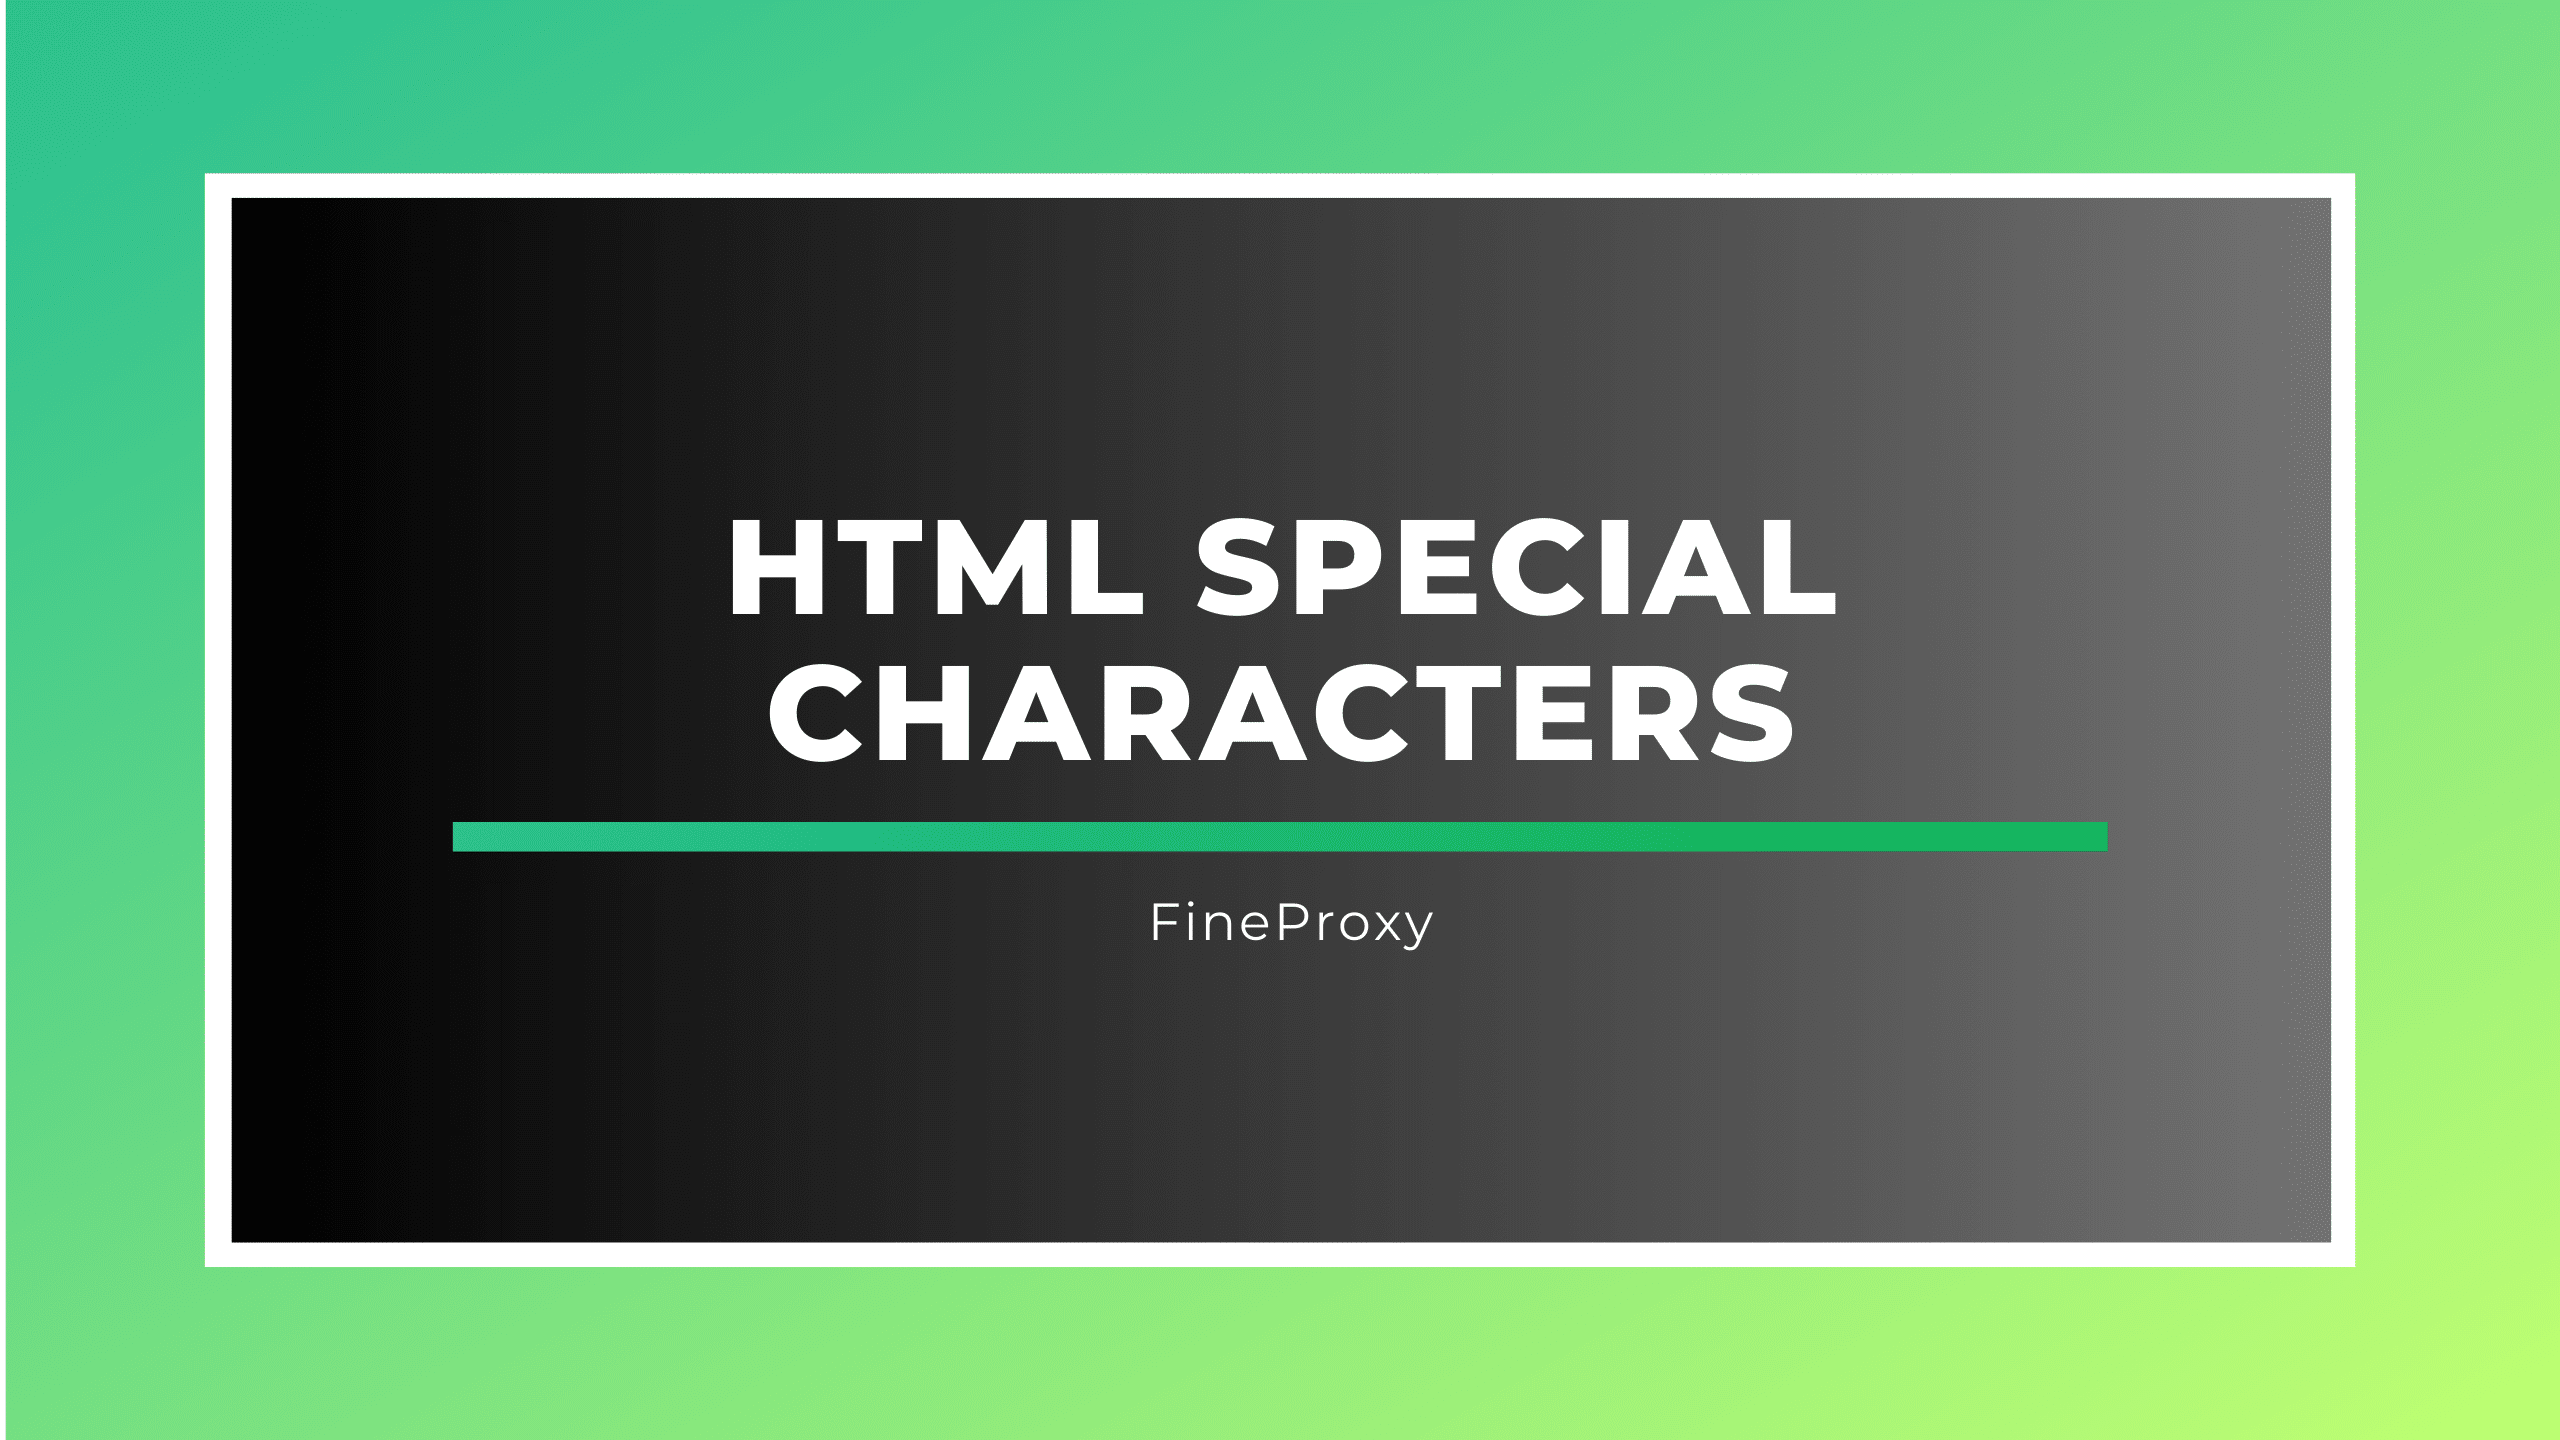 HTML special characters